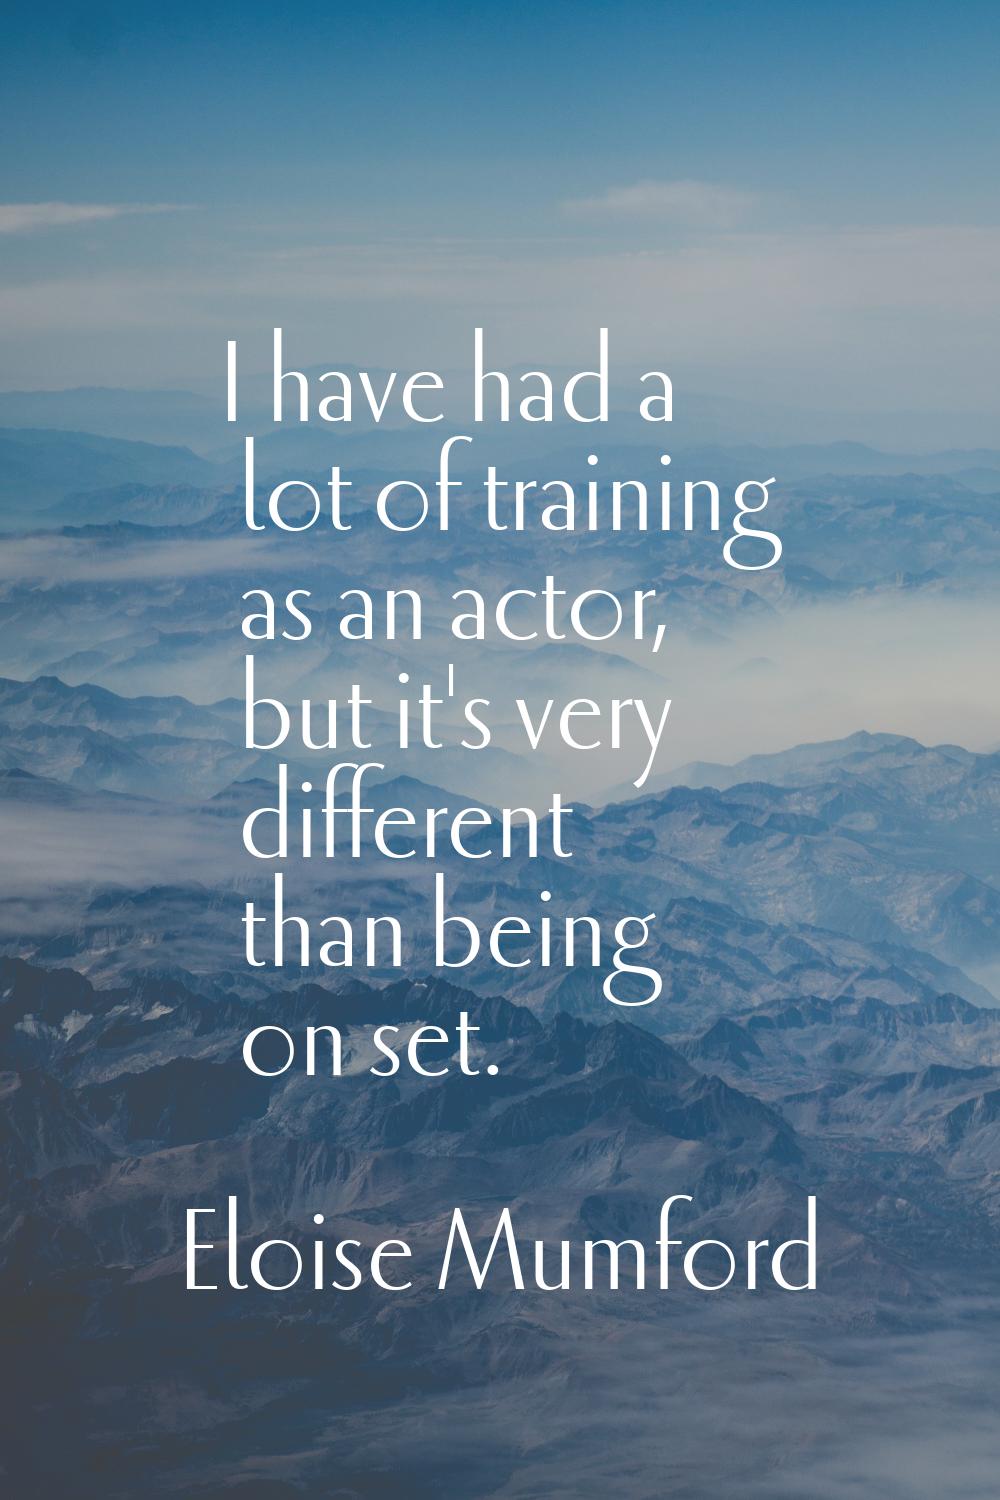 I have had a lot of training as an actor, but it's very different than being on set.